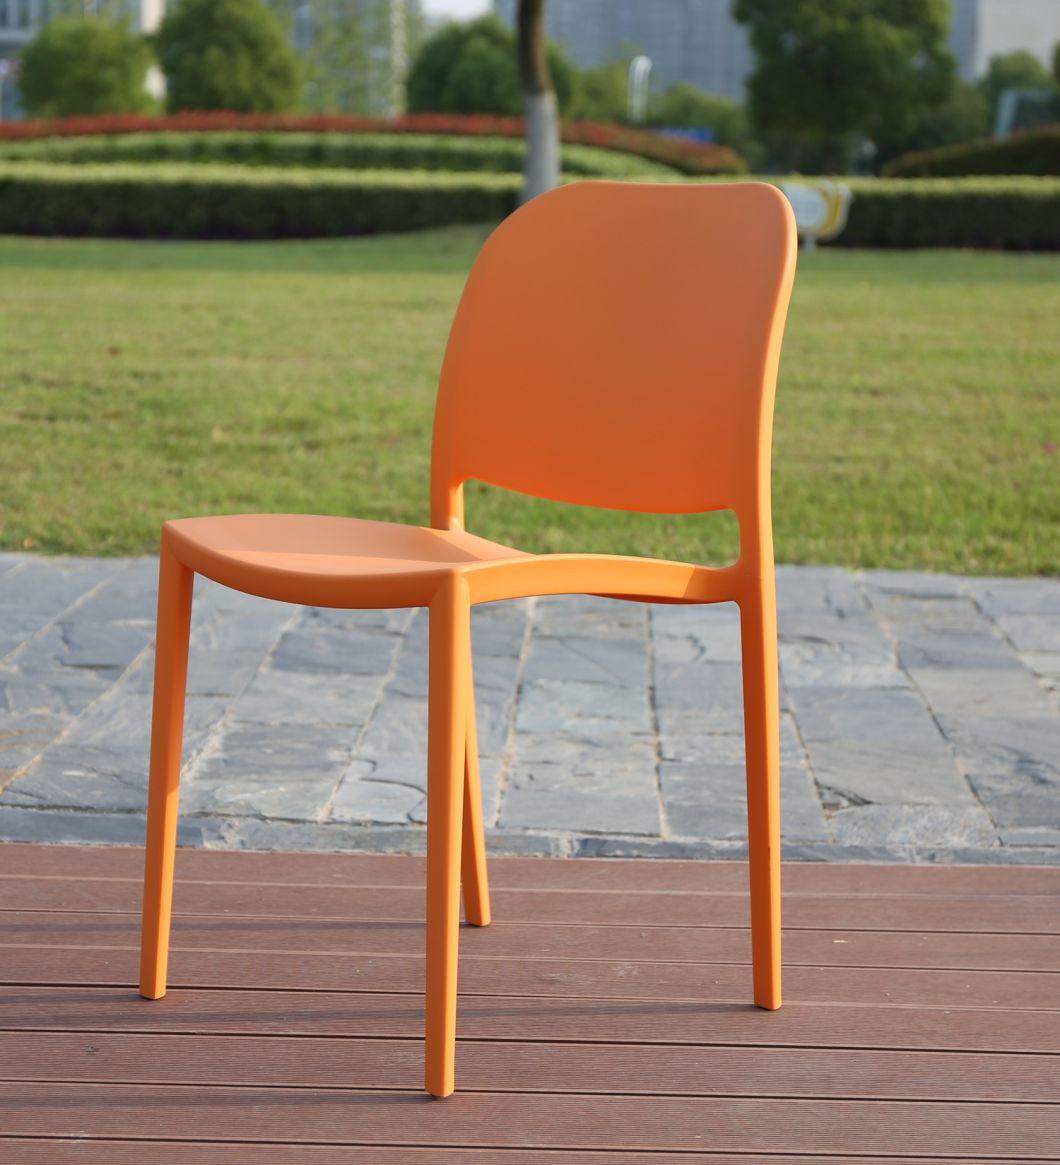 EU Standard Outdoor Restaurant Dining Chair Plastic Chairs for Garden ,Meeting ,Event,Party,Wedding,School,Hotel,Dining Hall ,Restaurant,Camping,Office,Bar